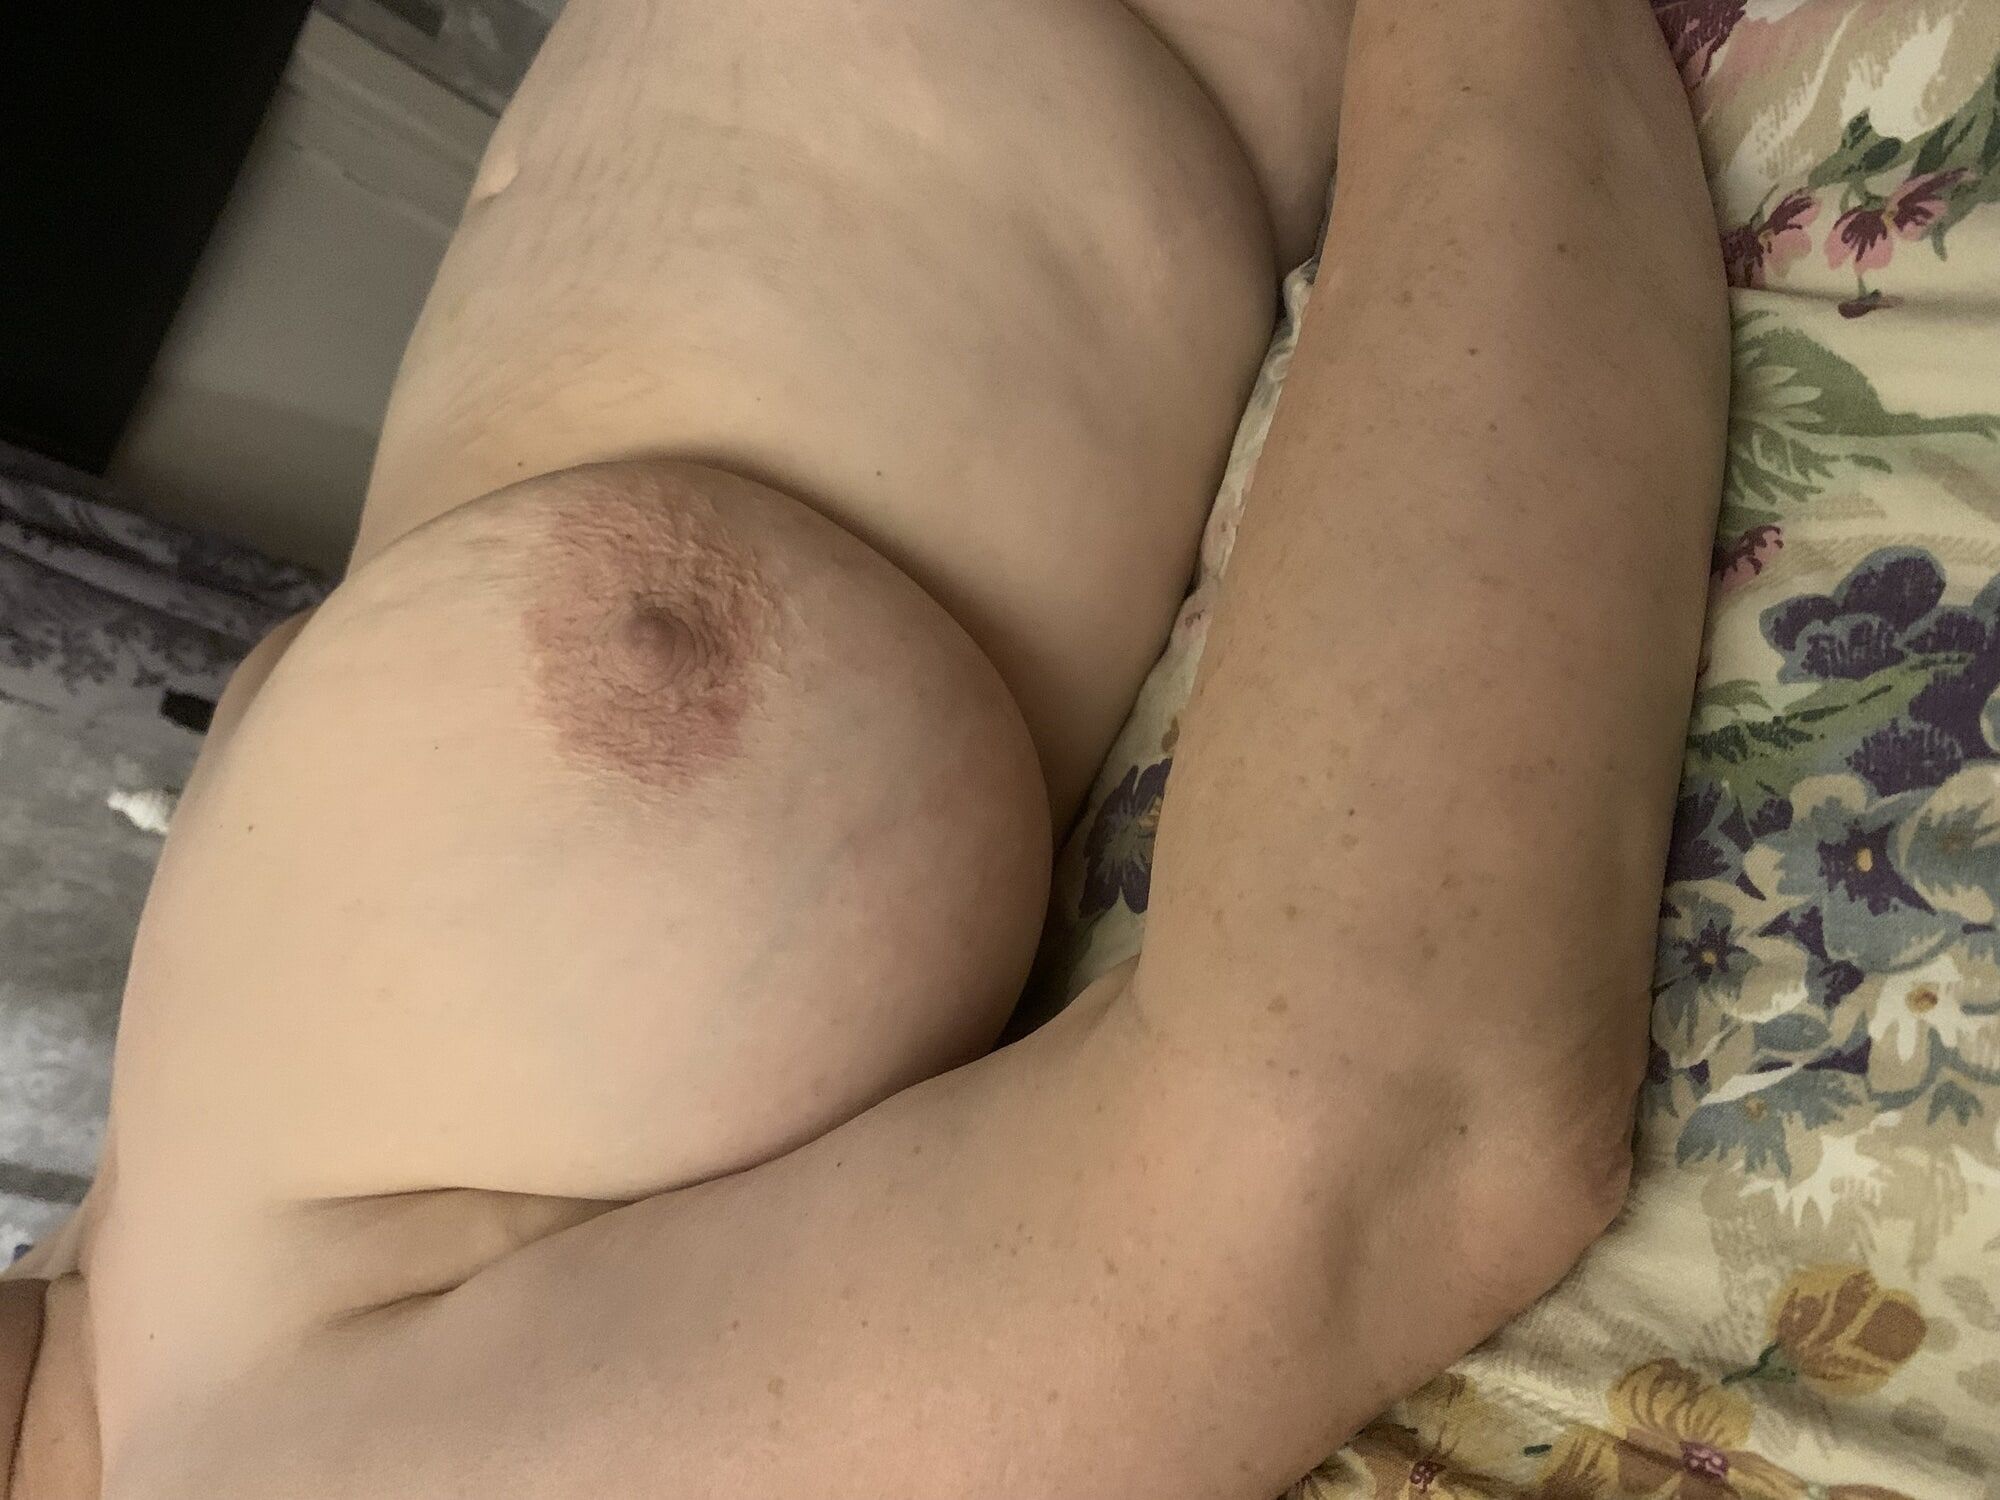 hi, here are more pictures of my little cock and my wife's t